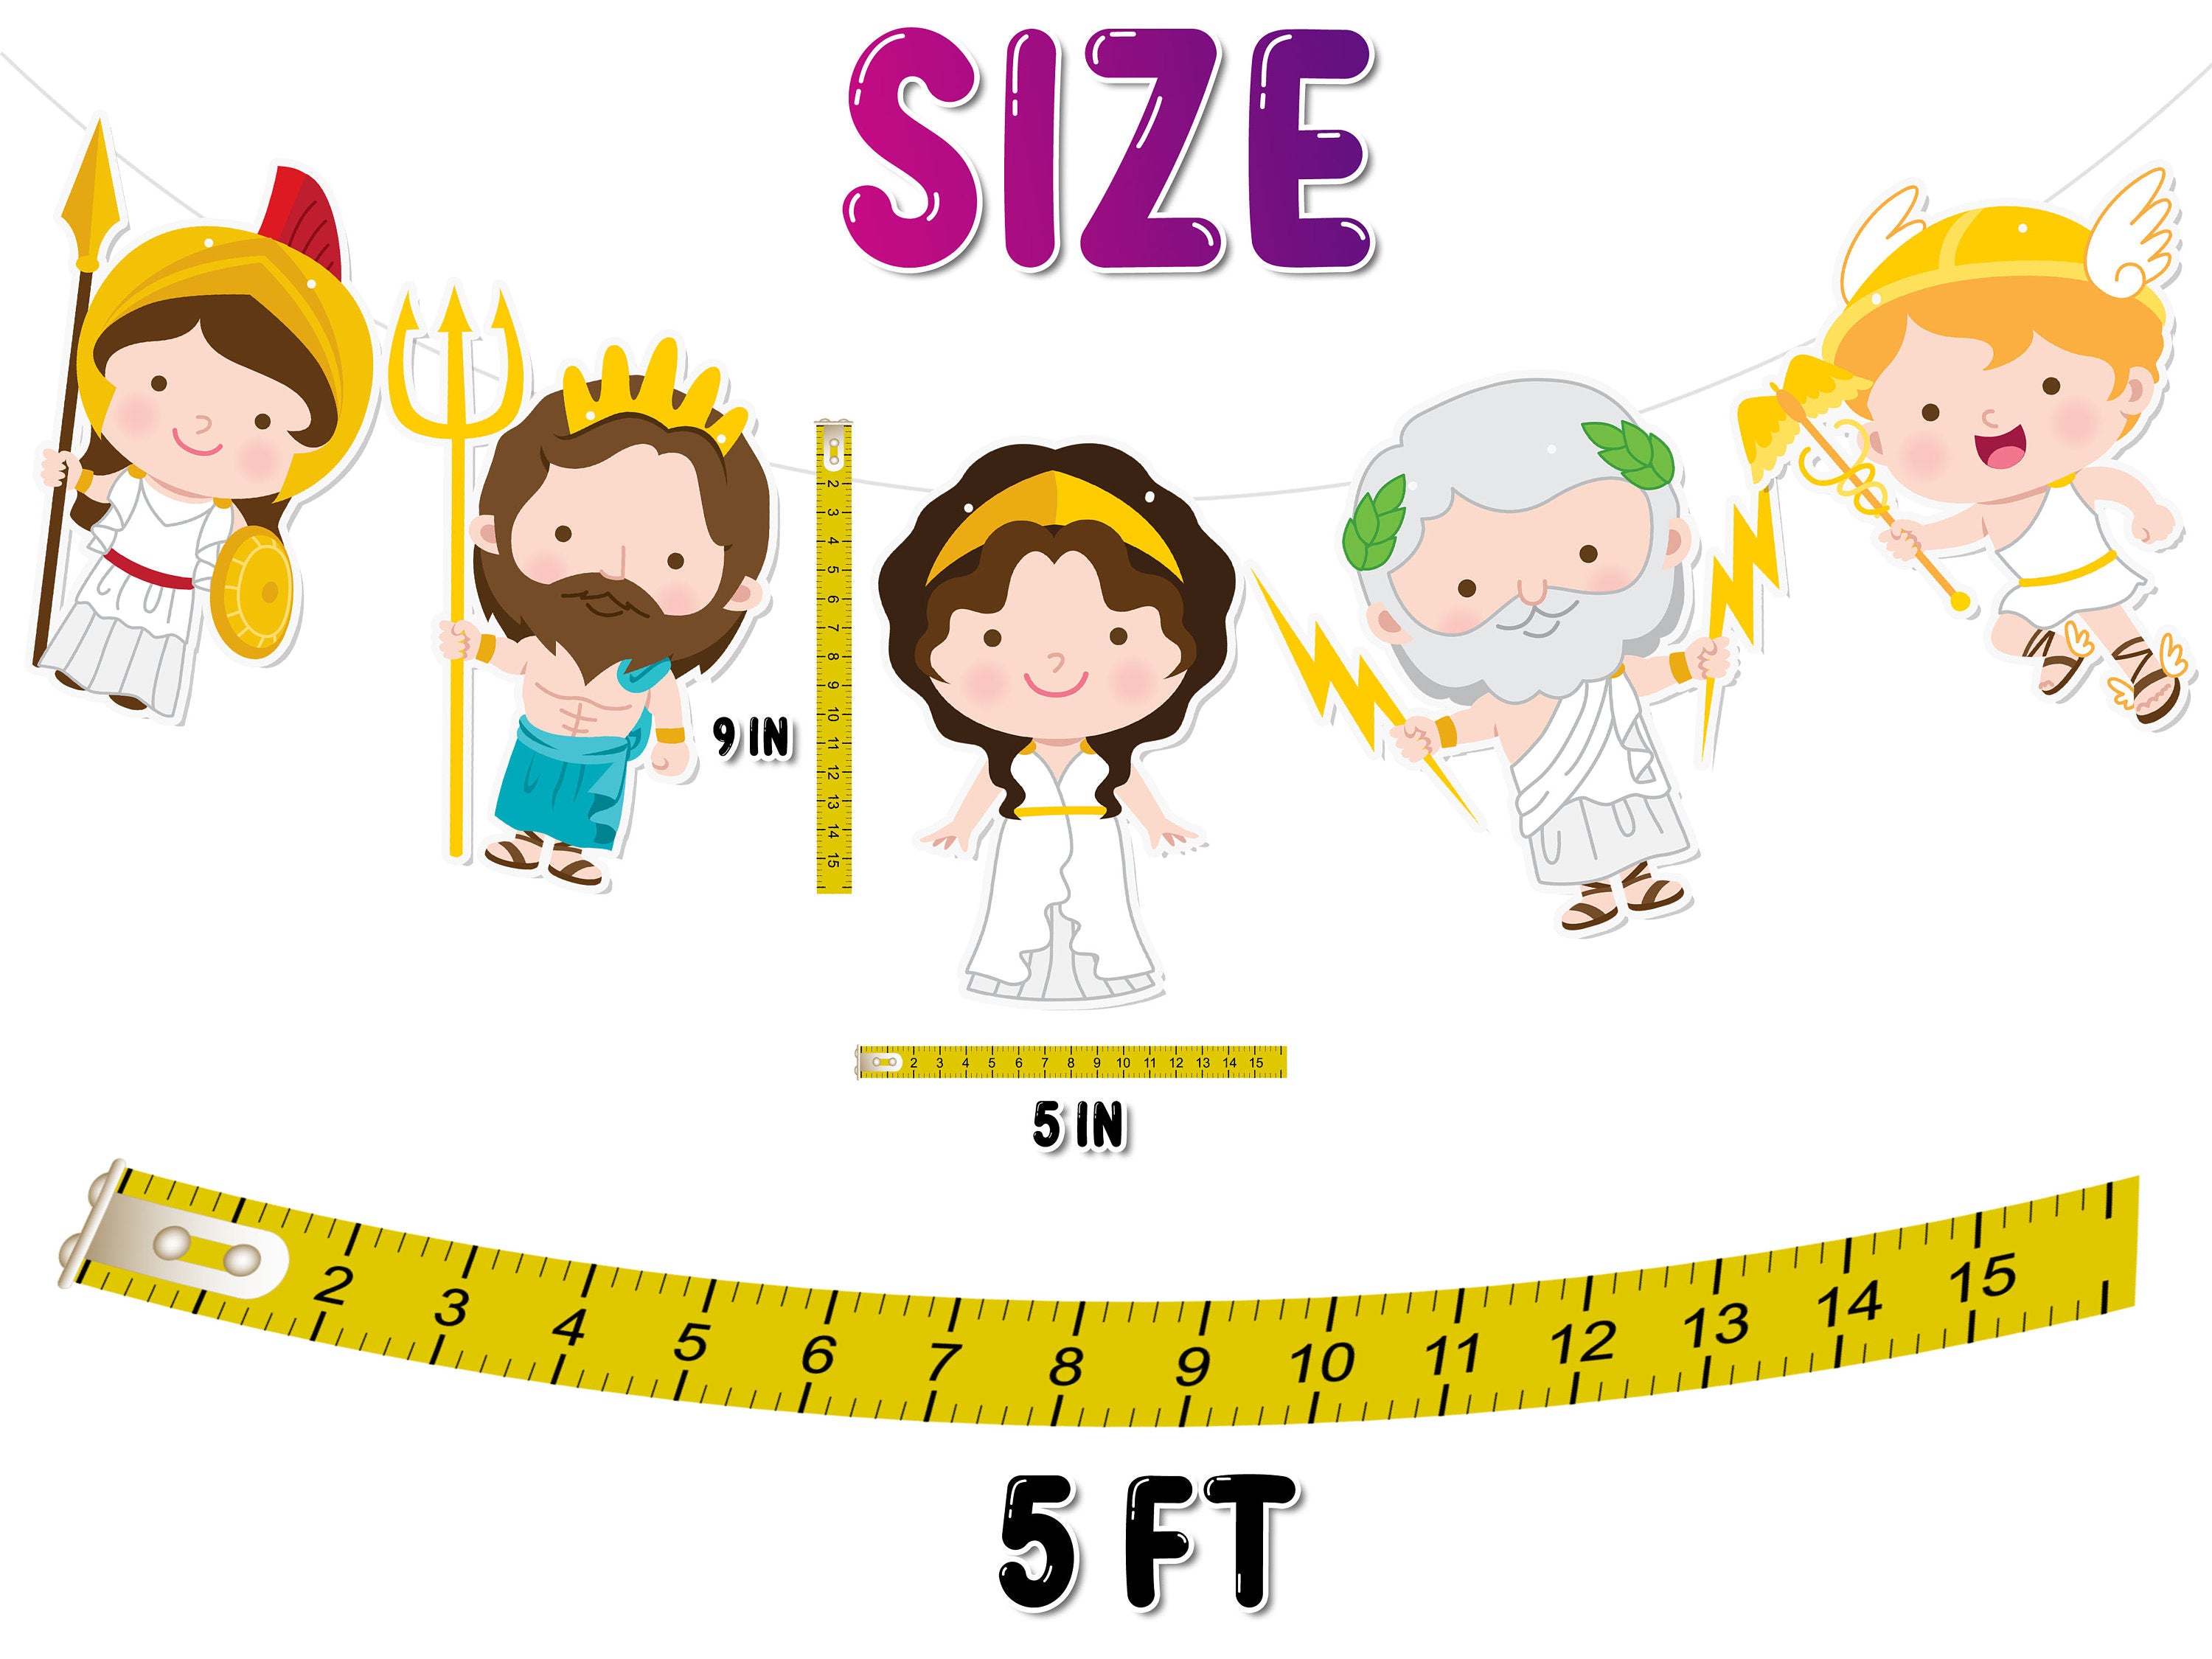 Mythical Greek Gods Cartoon Banner - Educational and Fun Decoration for Kids